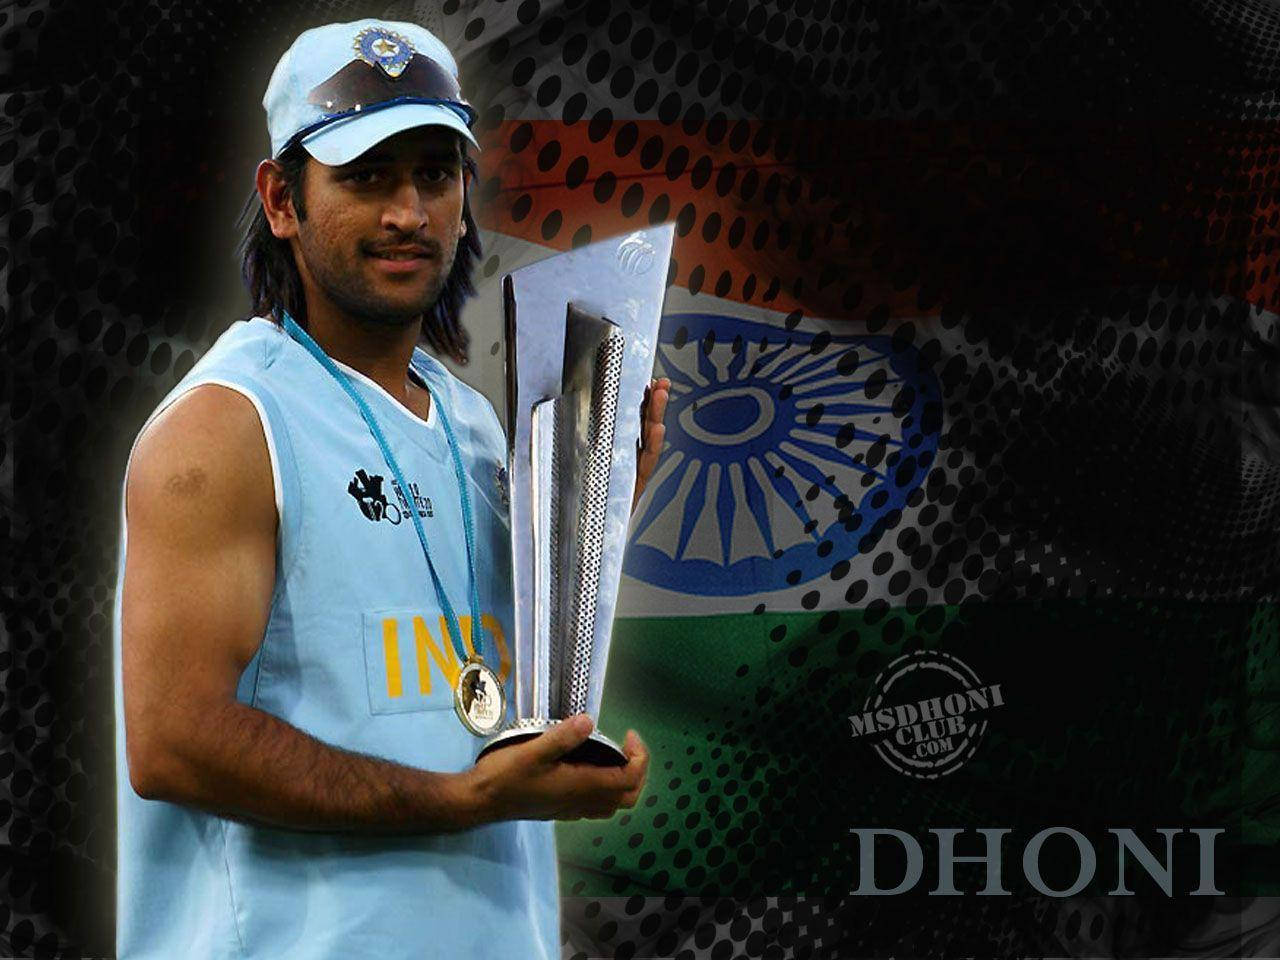 Ms Dhoni T20 World Cup Wallpaper